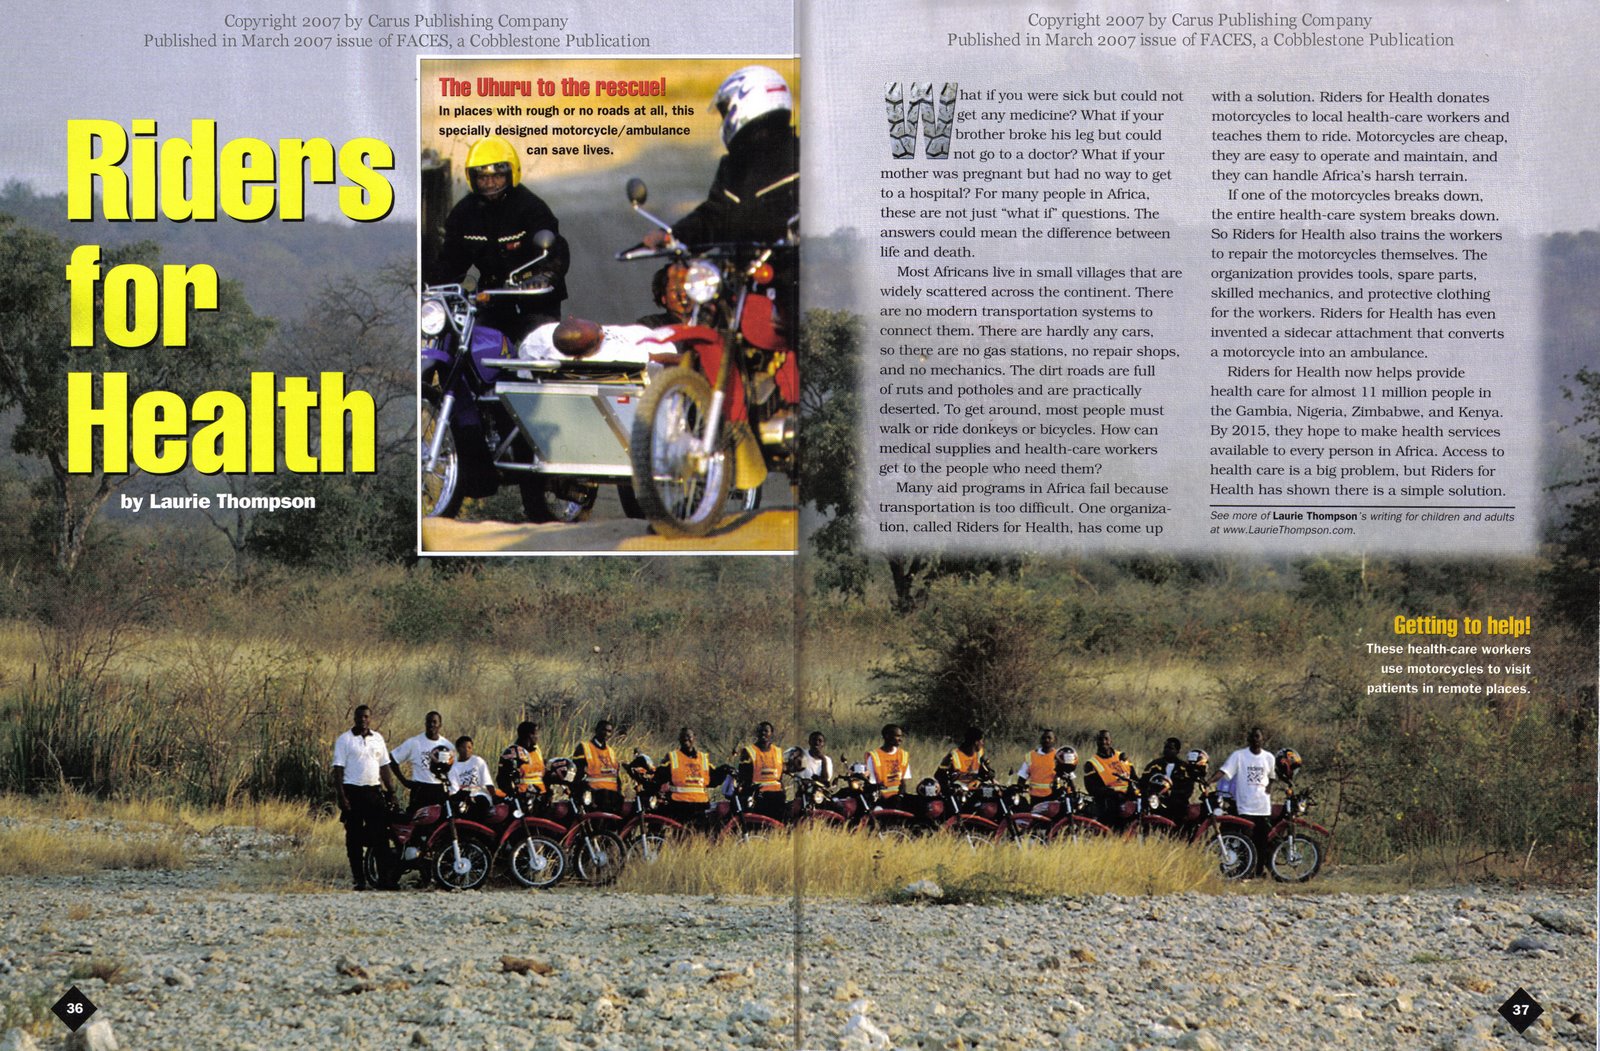 [2007-03+FACES+Riders+for+Health+article.jpg]